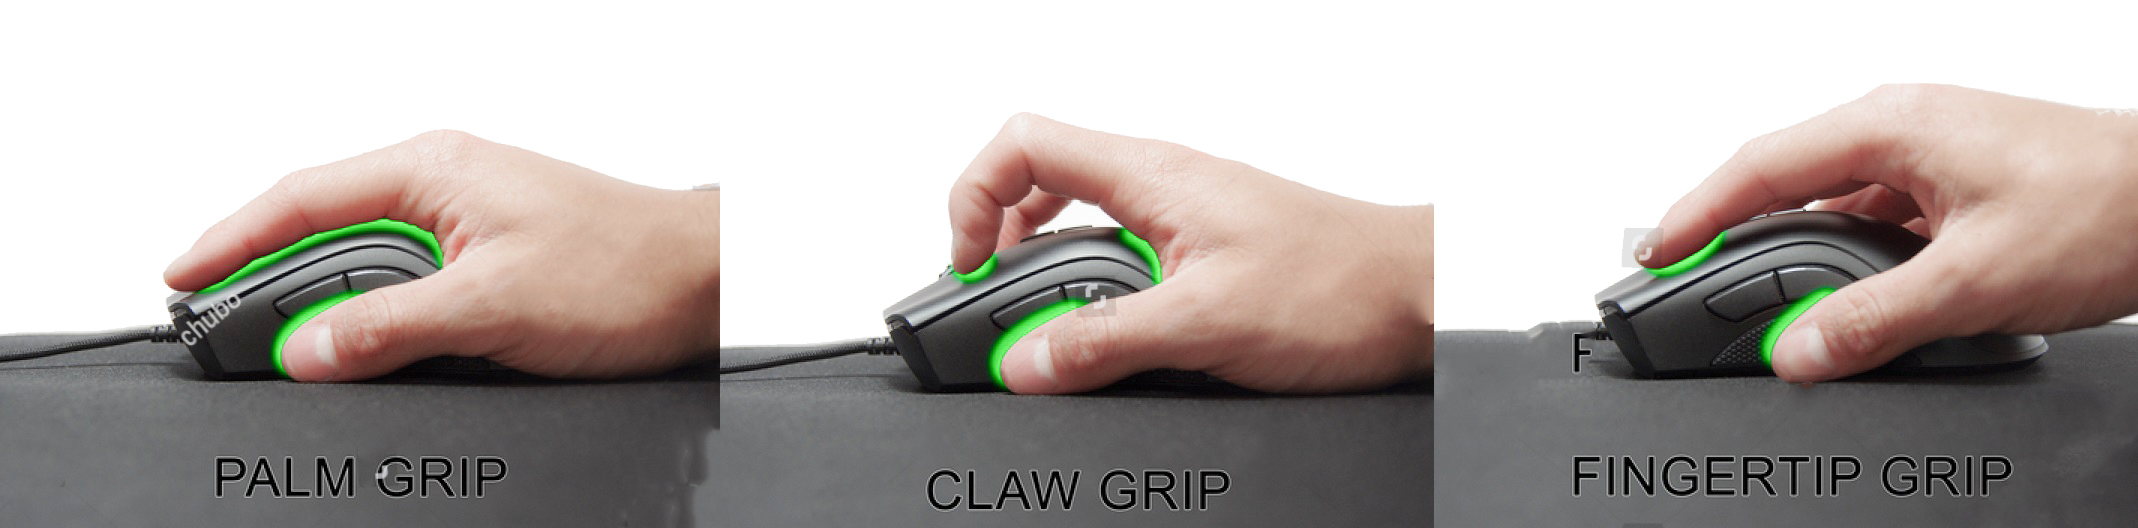 stock photo claw grip fingertip grip and palm grip of a mouse mouse grips holding a computer mouse 1795420465